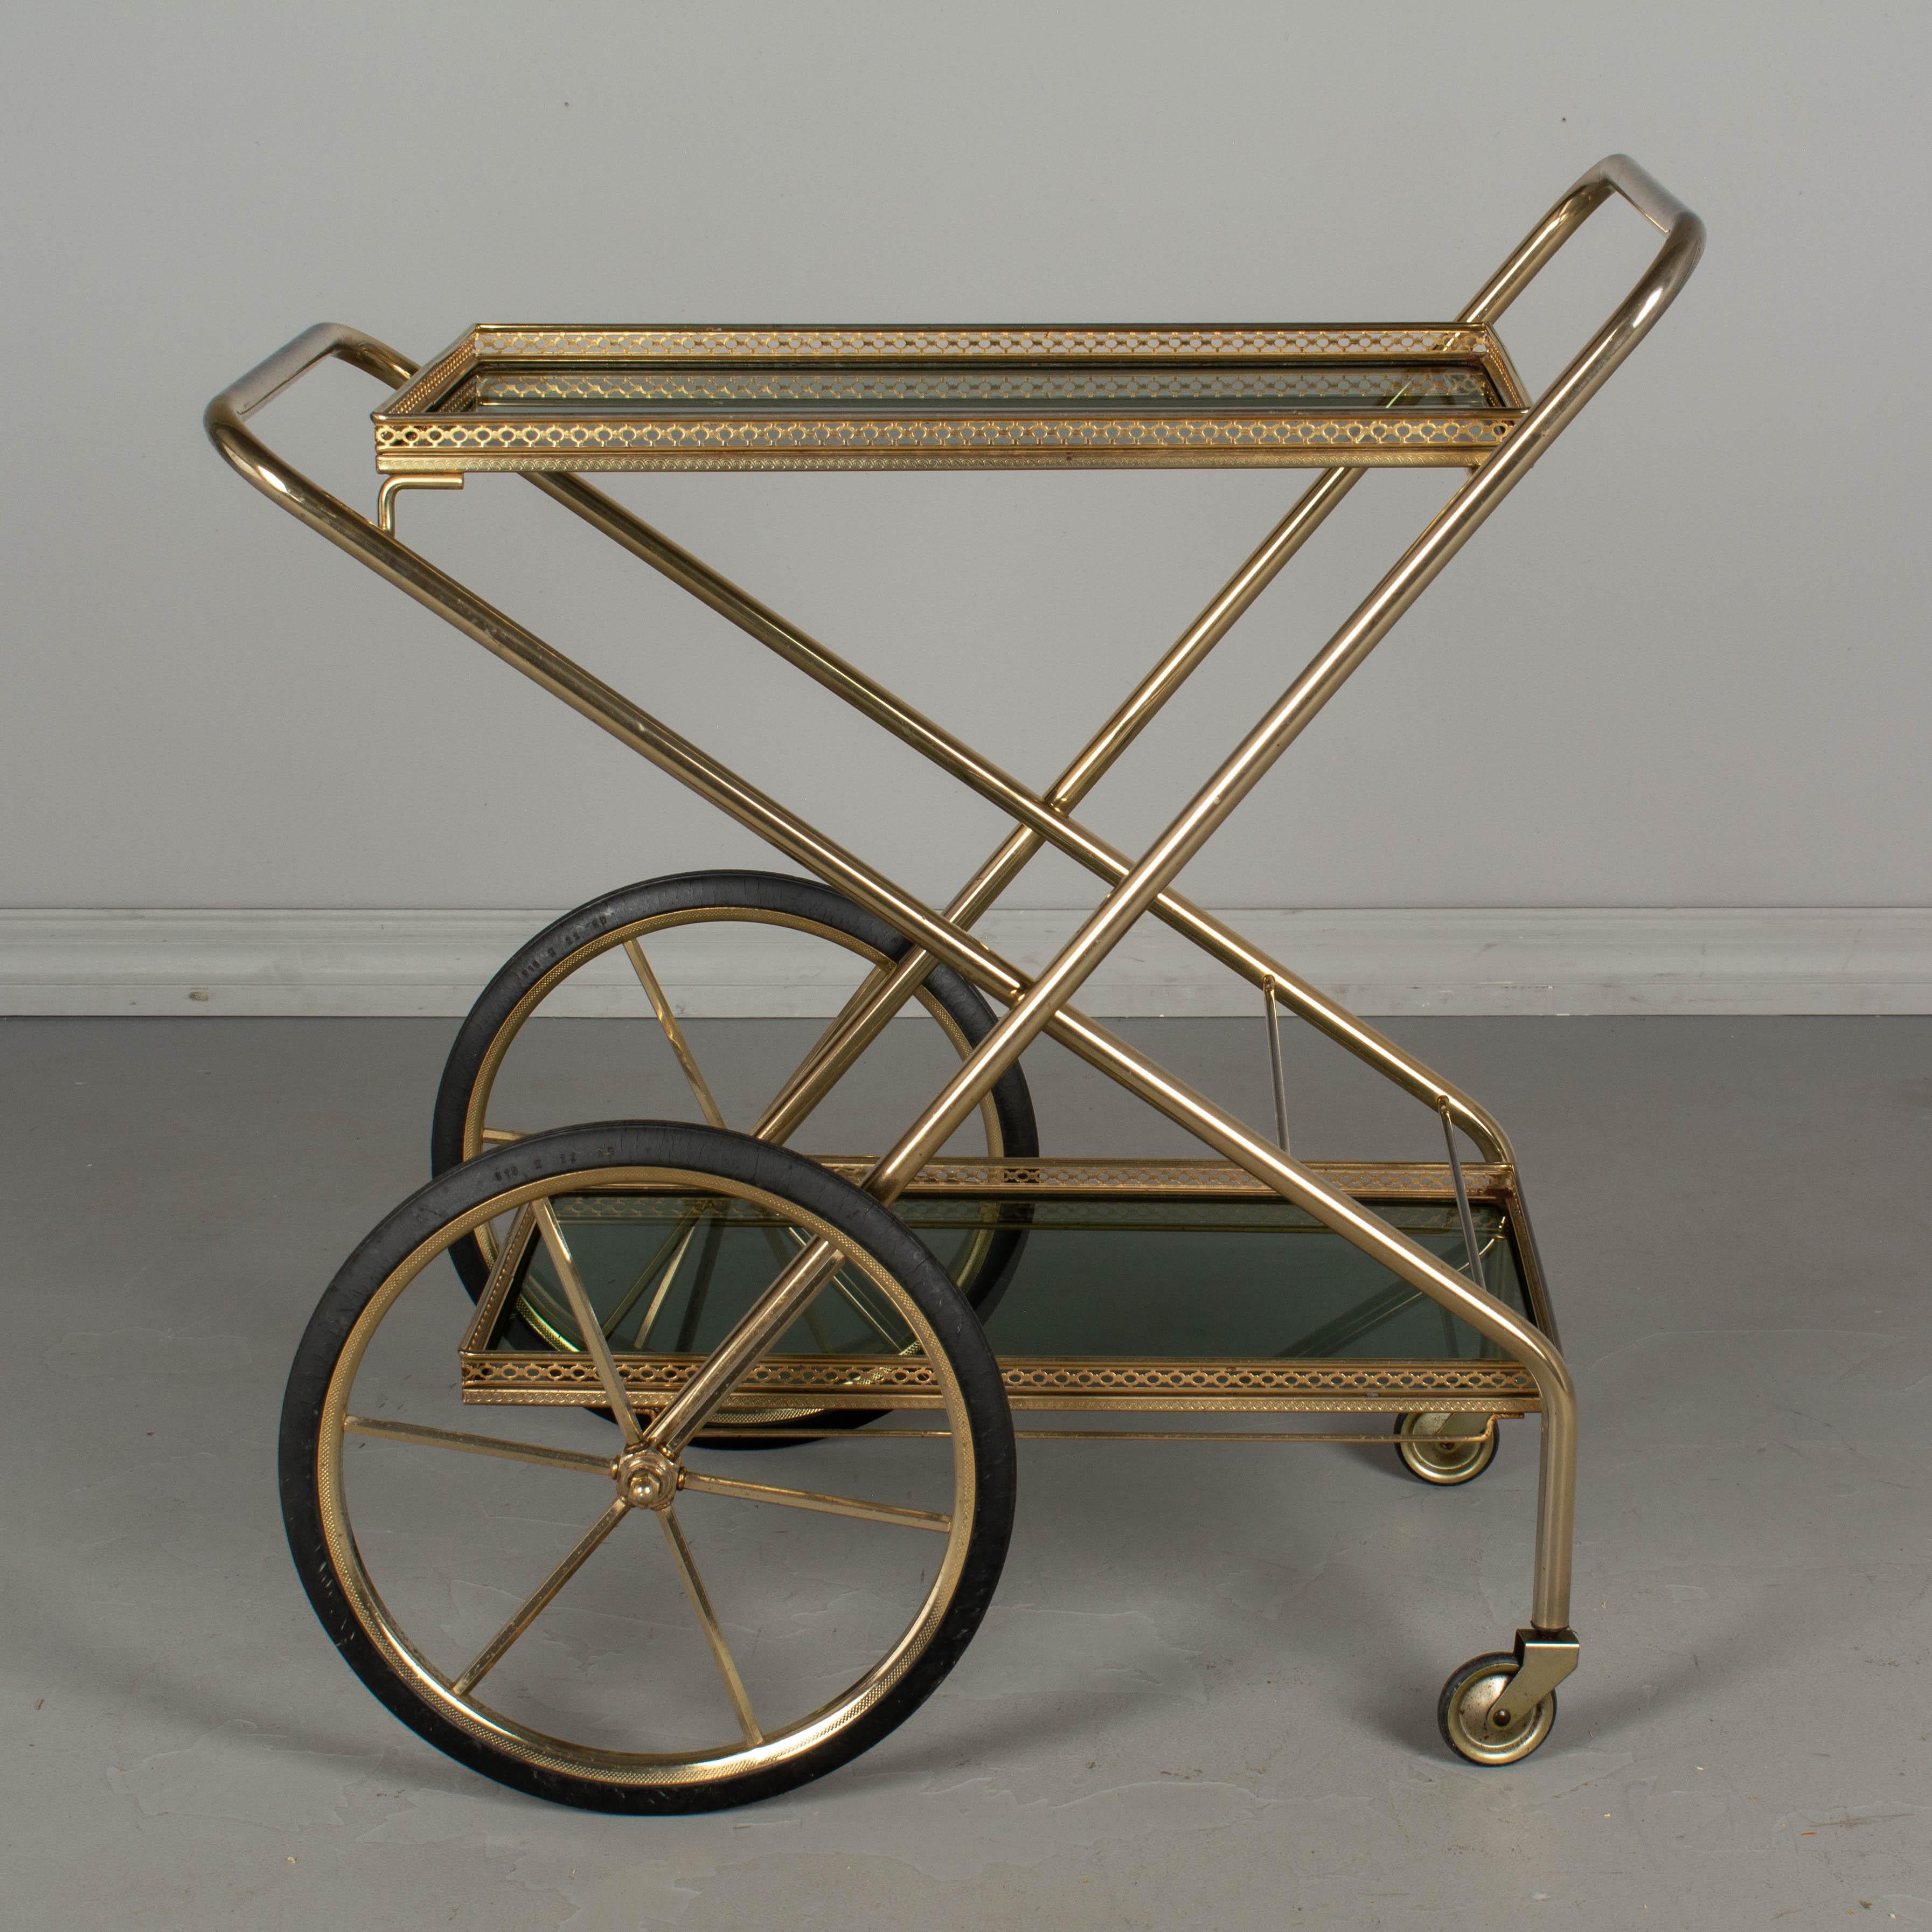 A French folding bar cart, or drinks trolley, with brass plated finish and smoke glass shelves with decorative gallery. The X-shaped frame is hinged and can be folded for easy storage. Superb design and well-made. Original rubber wheels glide